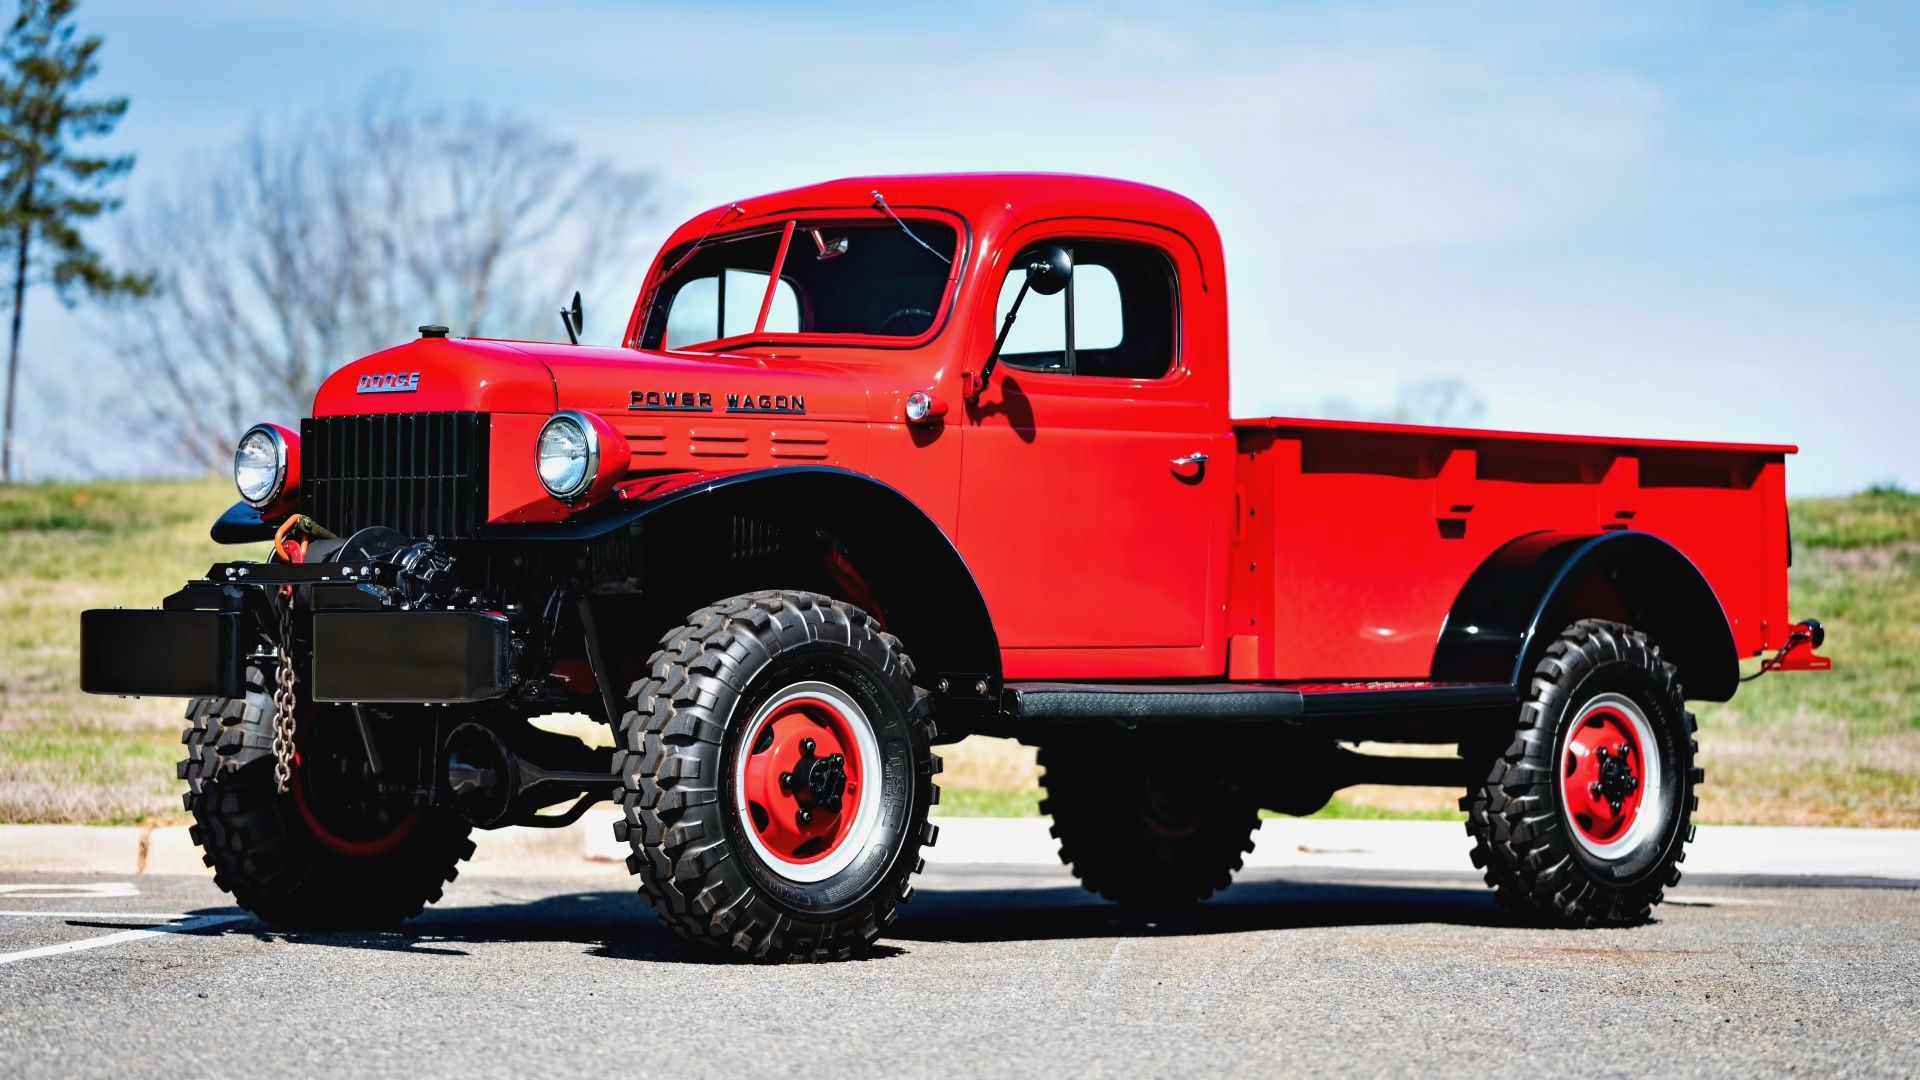 The Ram SRT-10 Is Still The Coolest Truck Ever - Viper-Powered